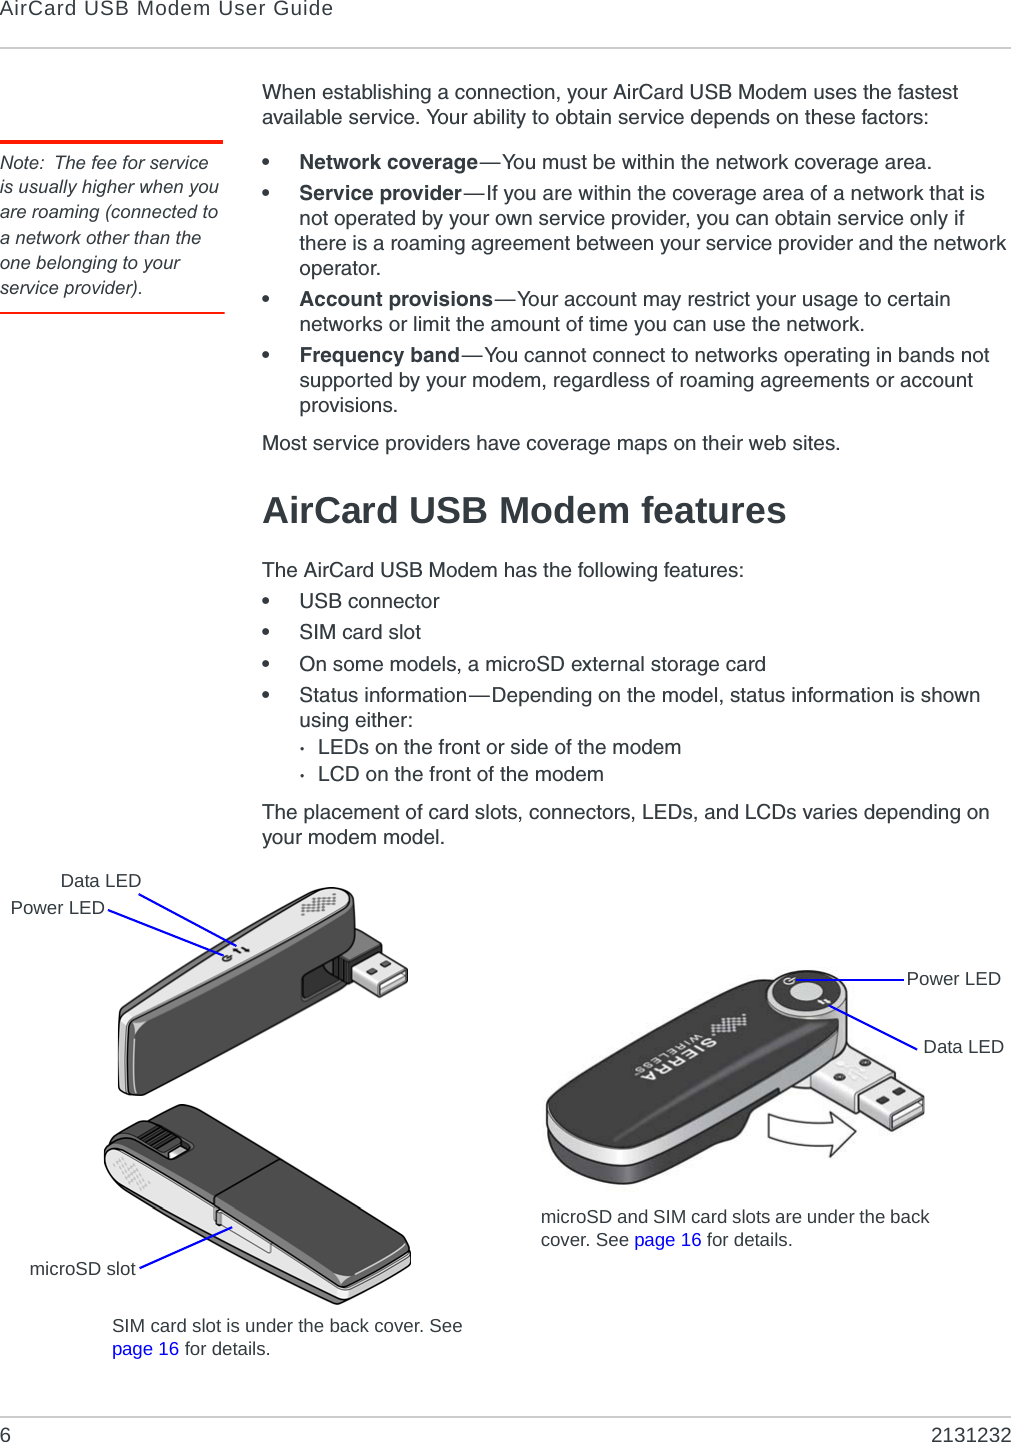 AirCard USB Modem User Guide62131232When establishing a connection, your AirCard USB Modem uses the fastest available service. Your ability to obtain service depends on these factors:Note: The fee for service is usually higher when you are roaming (connected to a network other than the one belonging to your service provider).• Network coverage—You must be within the network coverage area.• Service provider—If you are within the coverage area of a network that is not operated by your own service provider, you can obtain service only if there is a roaming agreement between your service provider and the network operator.• Account provisions—Your account may restrict your usage to certain networks or limit the amount of time you can use the network.• Frequency band—You cannot connect to networks operating in bands not supported by your modem, regardless of roaming agreements or account provisions.Most service providers have coverage maps on their web sites.AirCard USB Modem featuresThe AirCard USB Modem has the following features:•USB connector•SIM card slot•On some models, a microSD external storage card•Status information—Depending on the model, status information is shown using either:·LEDs on the front or side of the modem·LCD on the front of the modemThe placement of card slots, connectors, LEDs, and LCDs varies depending on your modem model.Data LEDmicroSD slotSIM card slot is under the back cover. See page 16 for details.Power LEDPower LEDmicroSD and SIM card slots are under the back cover. See page 16 for details.Data LED